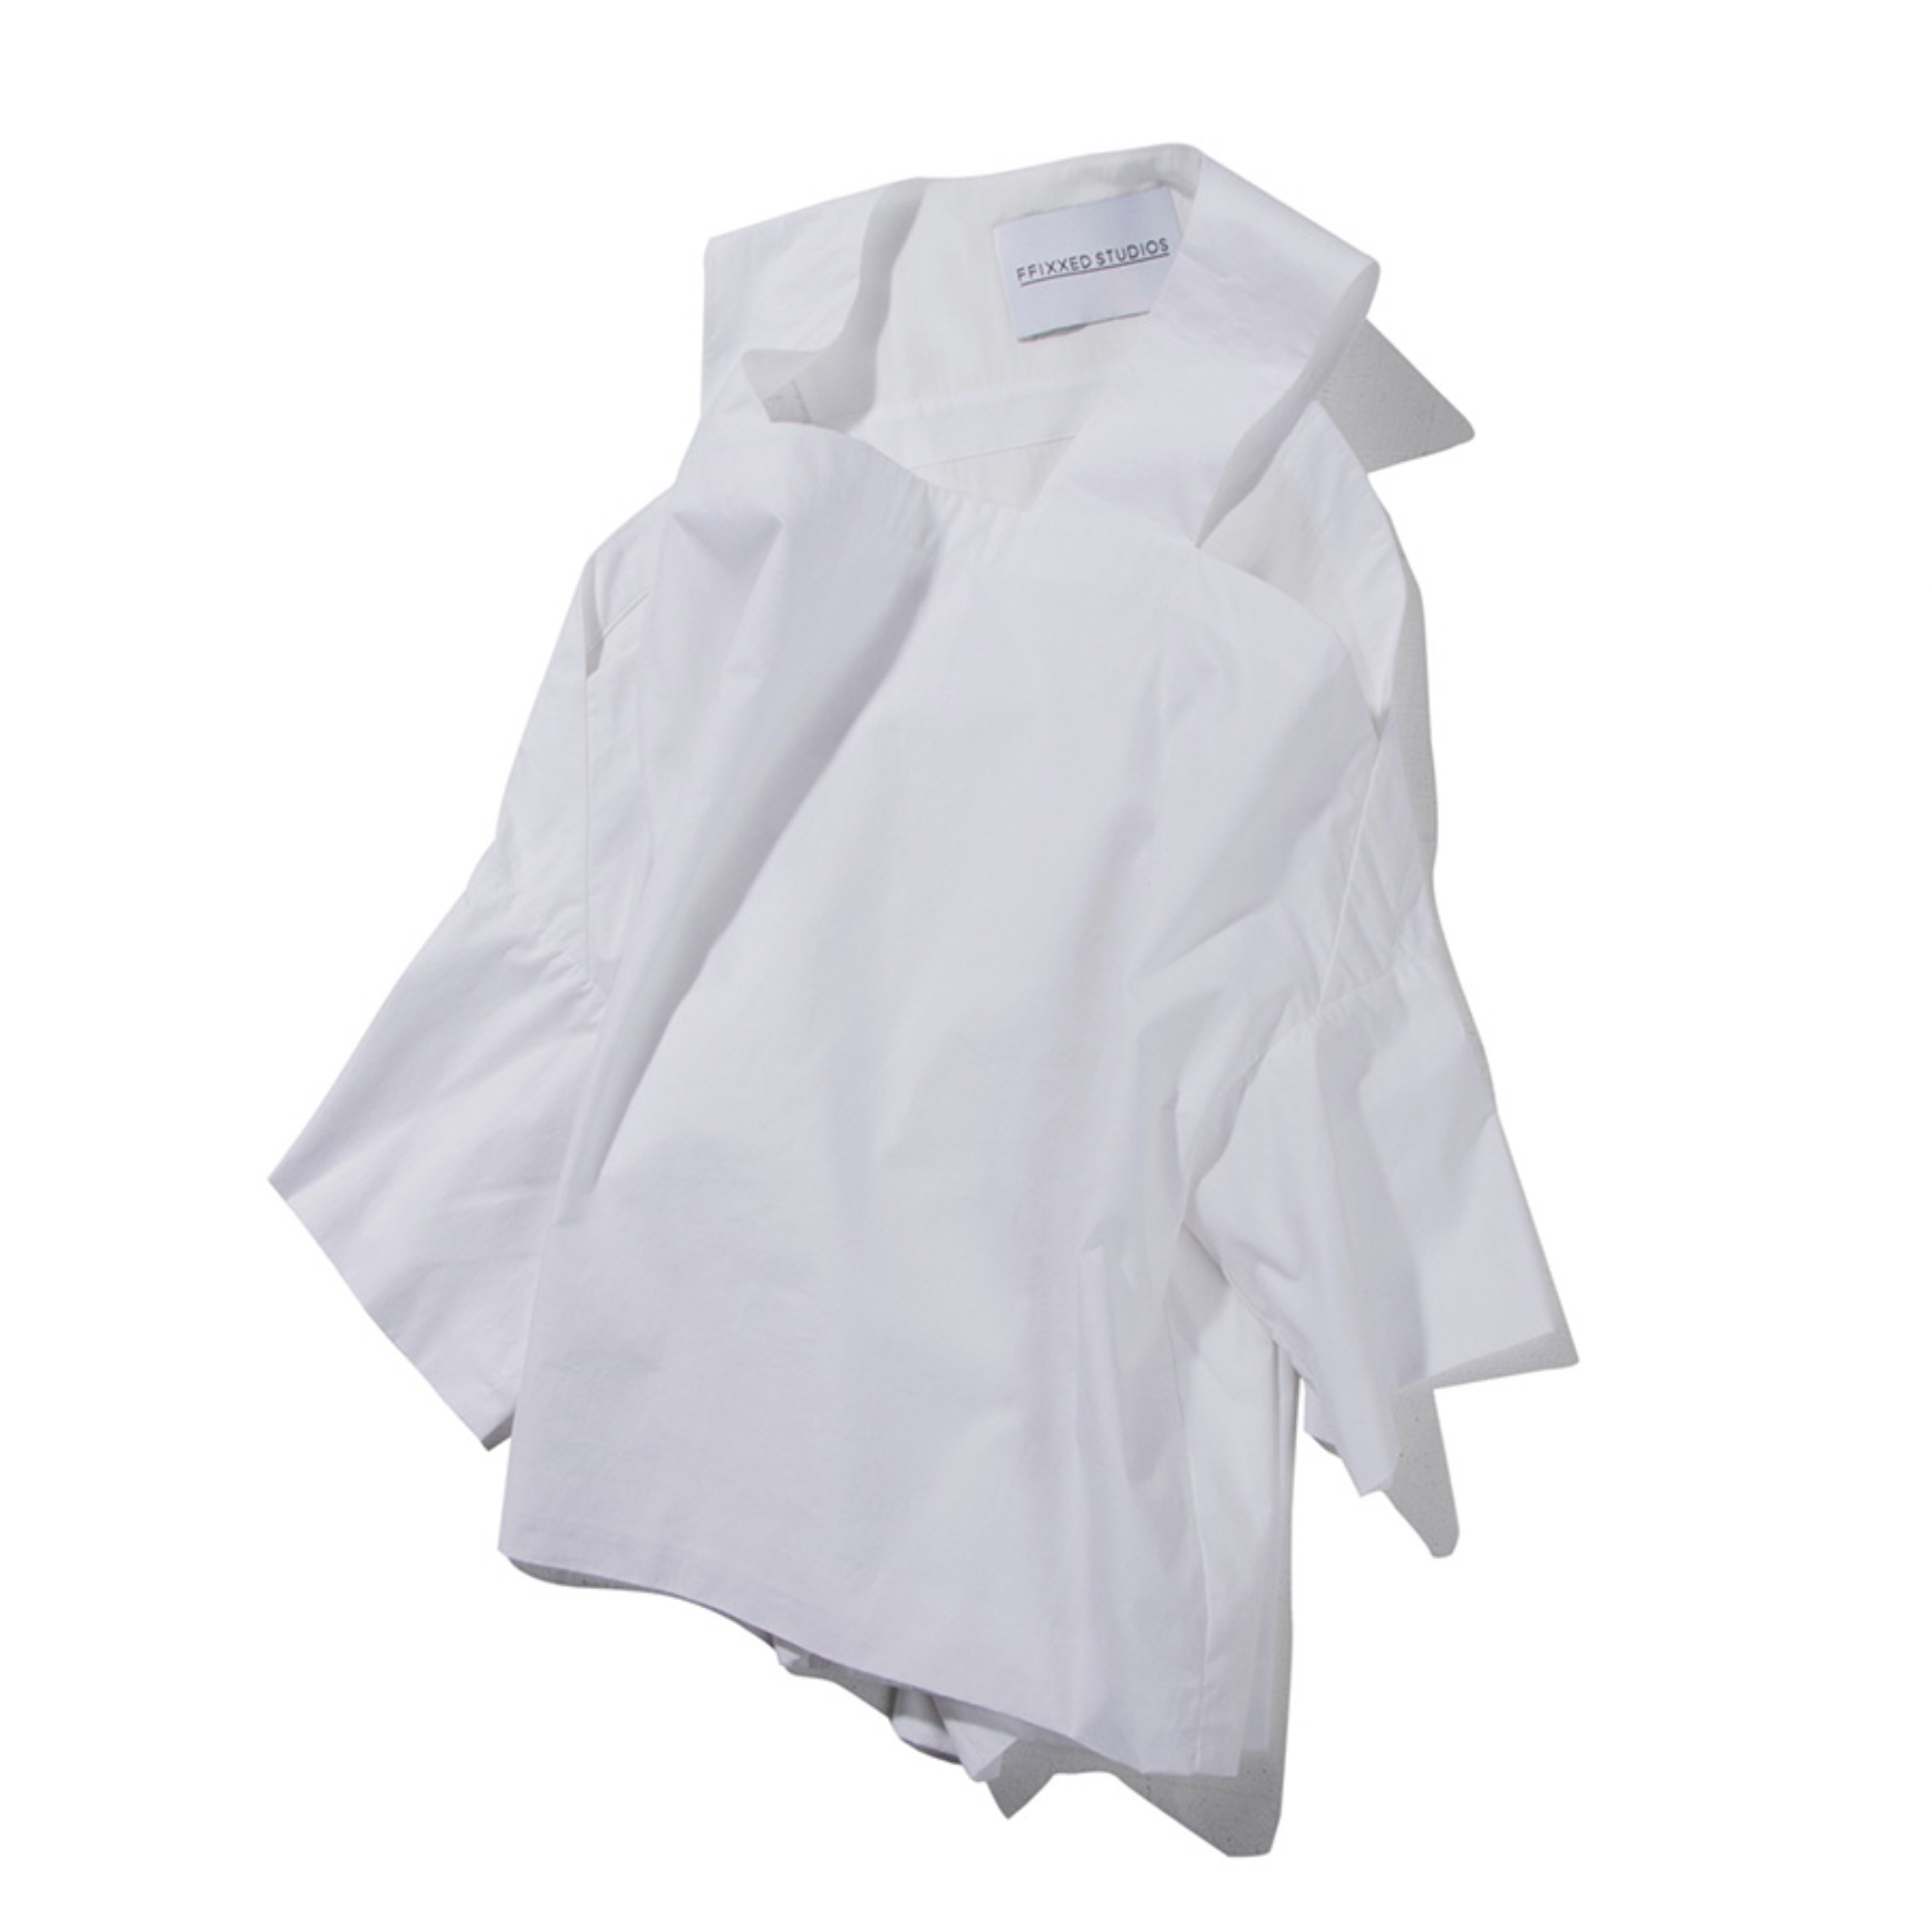 OUTLOOK TOP (WHITE)